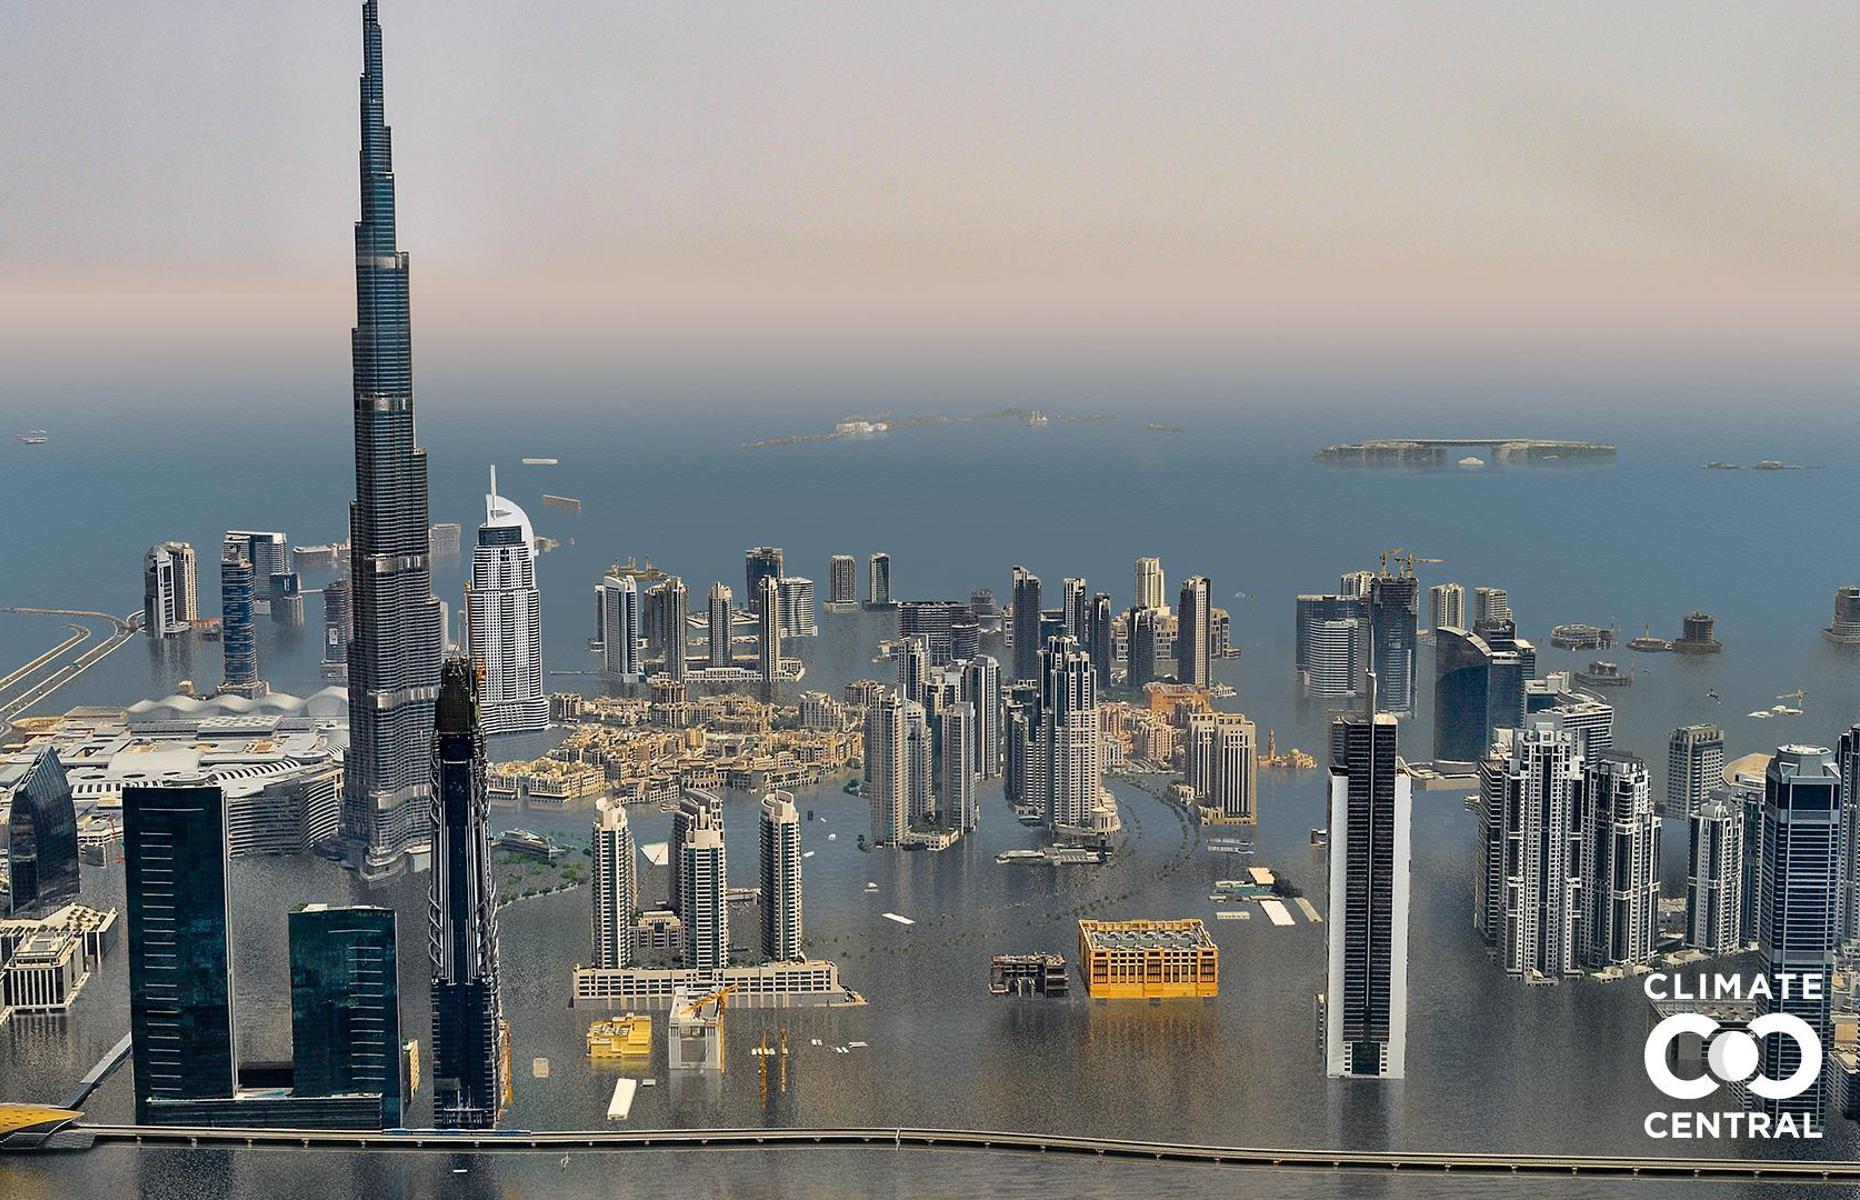 <p>The Burj Khalifa is the tallest building in the world at more than 2,716.5-feet (828m) high, but its mighty size won’t stop it being ravaged by climate change. As well as consuming the lower storeys of the skyscraper, surrounding roads, green spaces and low-rise buildings would be swallowed up by rising water.</p>